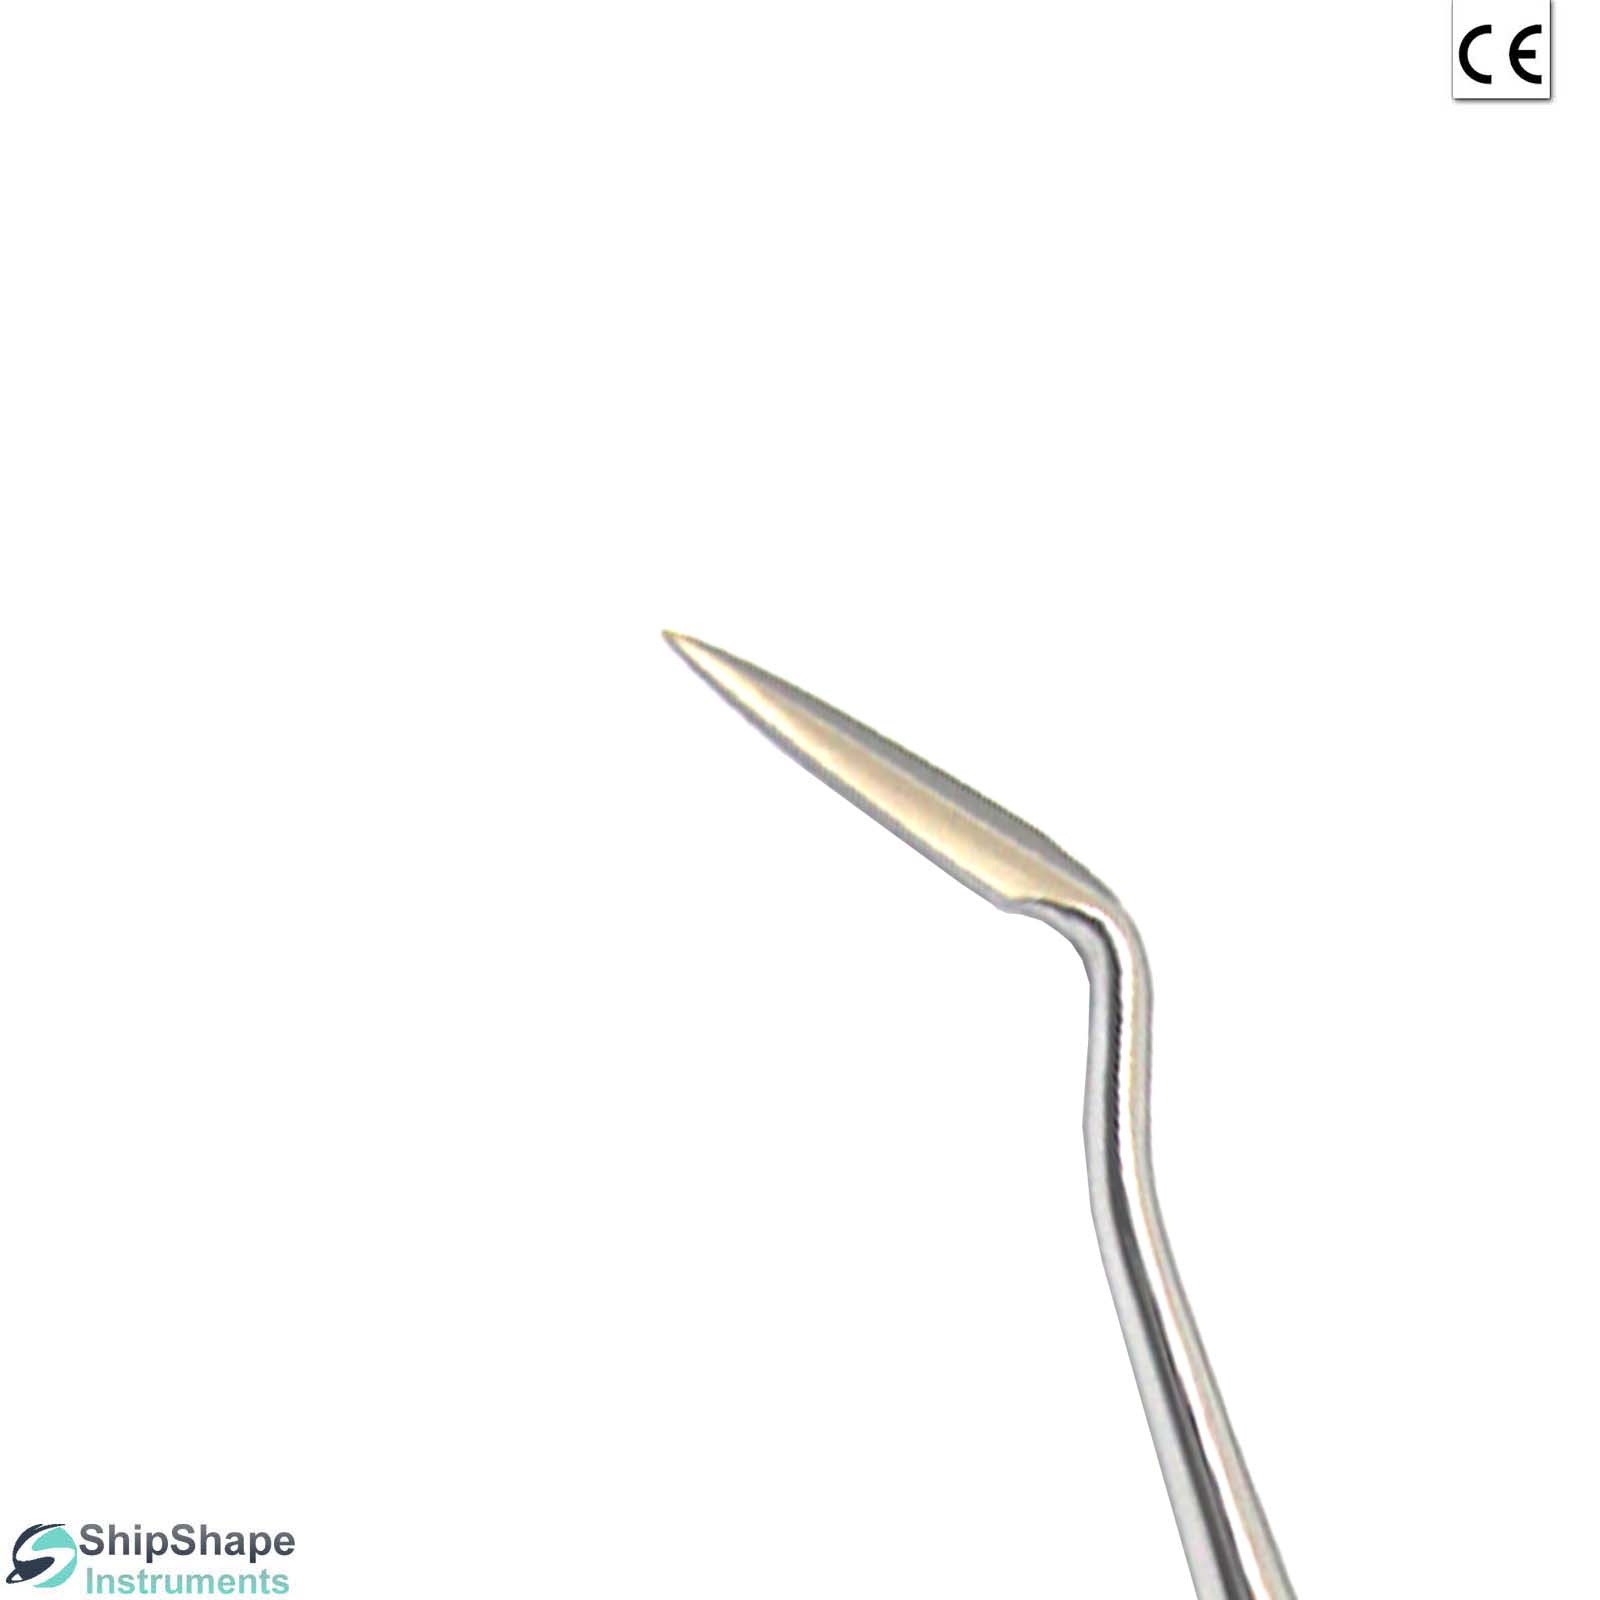 5/6 Buck Periodontal Knife Recontour Soft Tissue Surgical Detal Gingival Knives-798